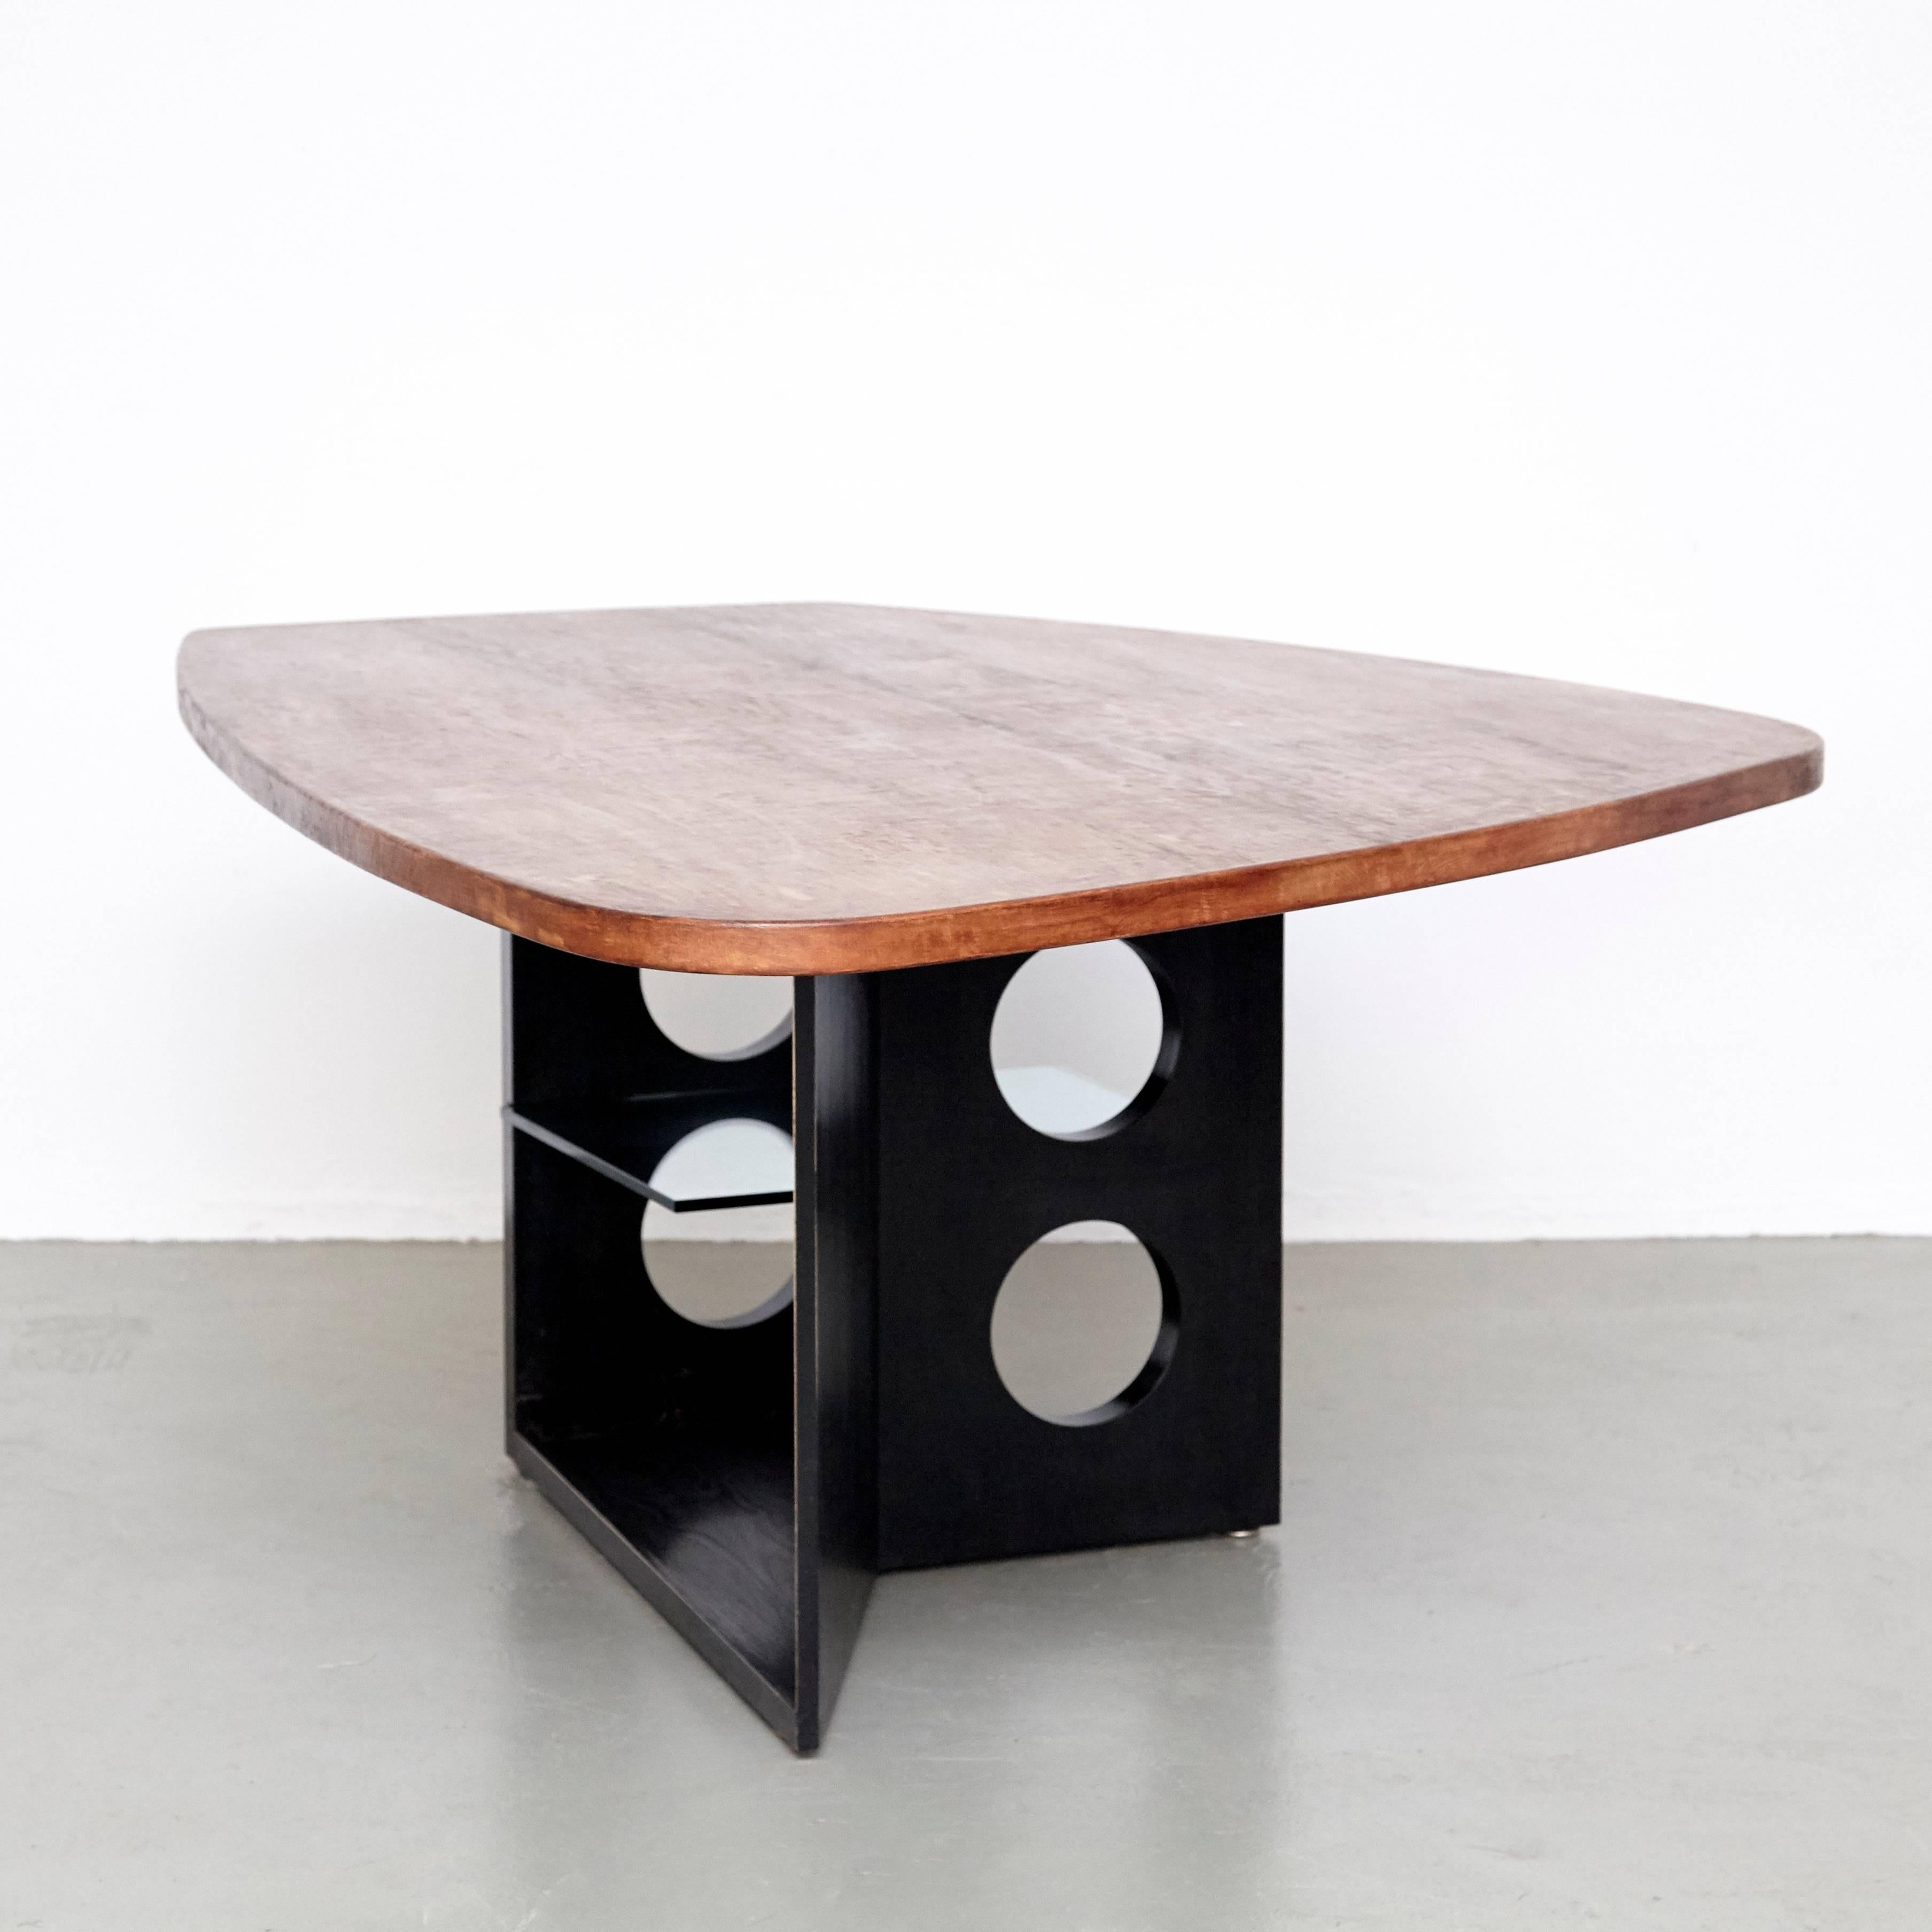 M21 Table designed by Jean Prouvé in 1940, manufactured by Tecta in the 1980s.

In good original condition, with minor wear consistent with age and use, preserving a beautiful patina.

Jean Prouvé (1901-1984), French Industrial and furniture